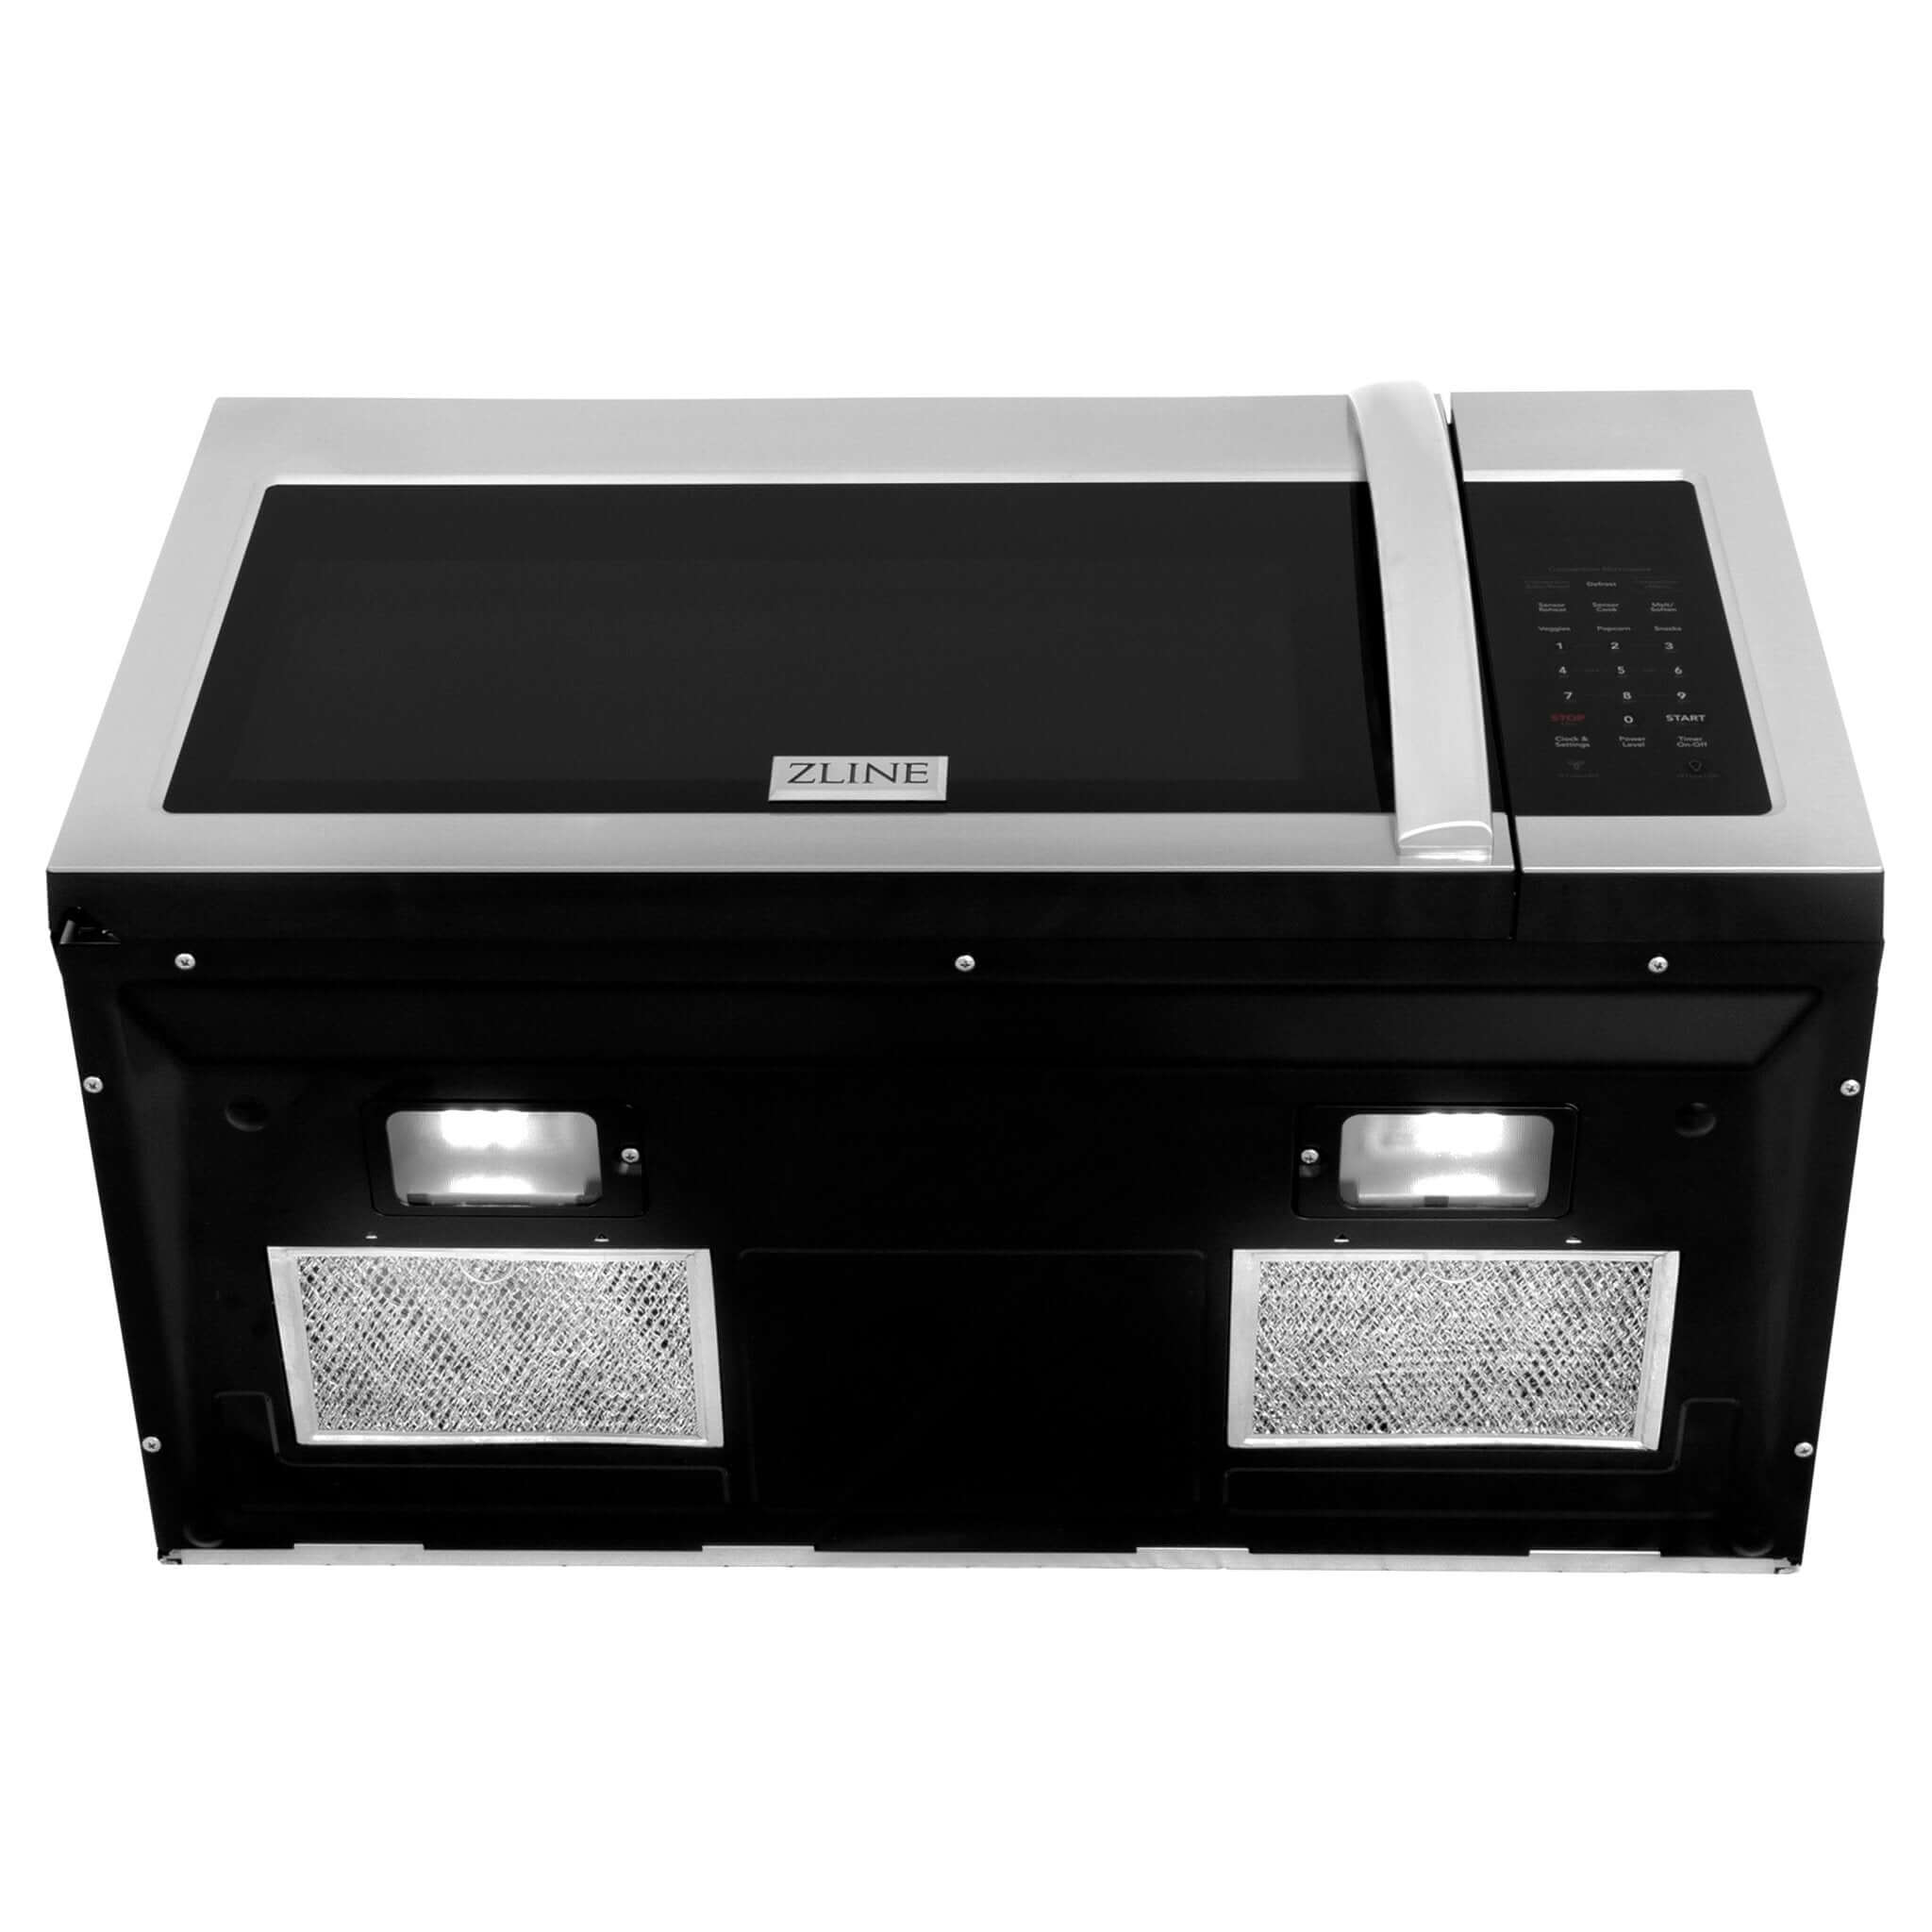 ZLINE's 30 inch over the range microwave (MWO-OTR-30) features 2-Speed Powerful Ventilation - Enjoy up to a 300 CFM air flow that effectively removes unwanted smoke and grease from your kitchen